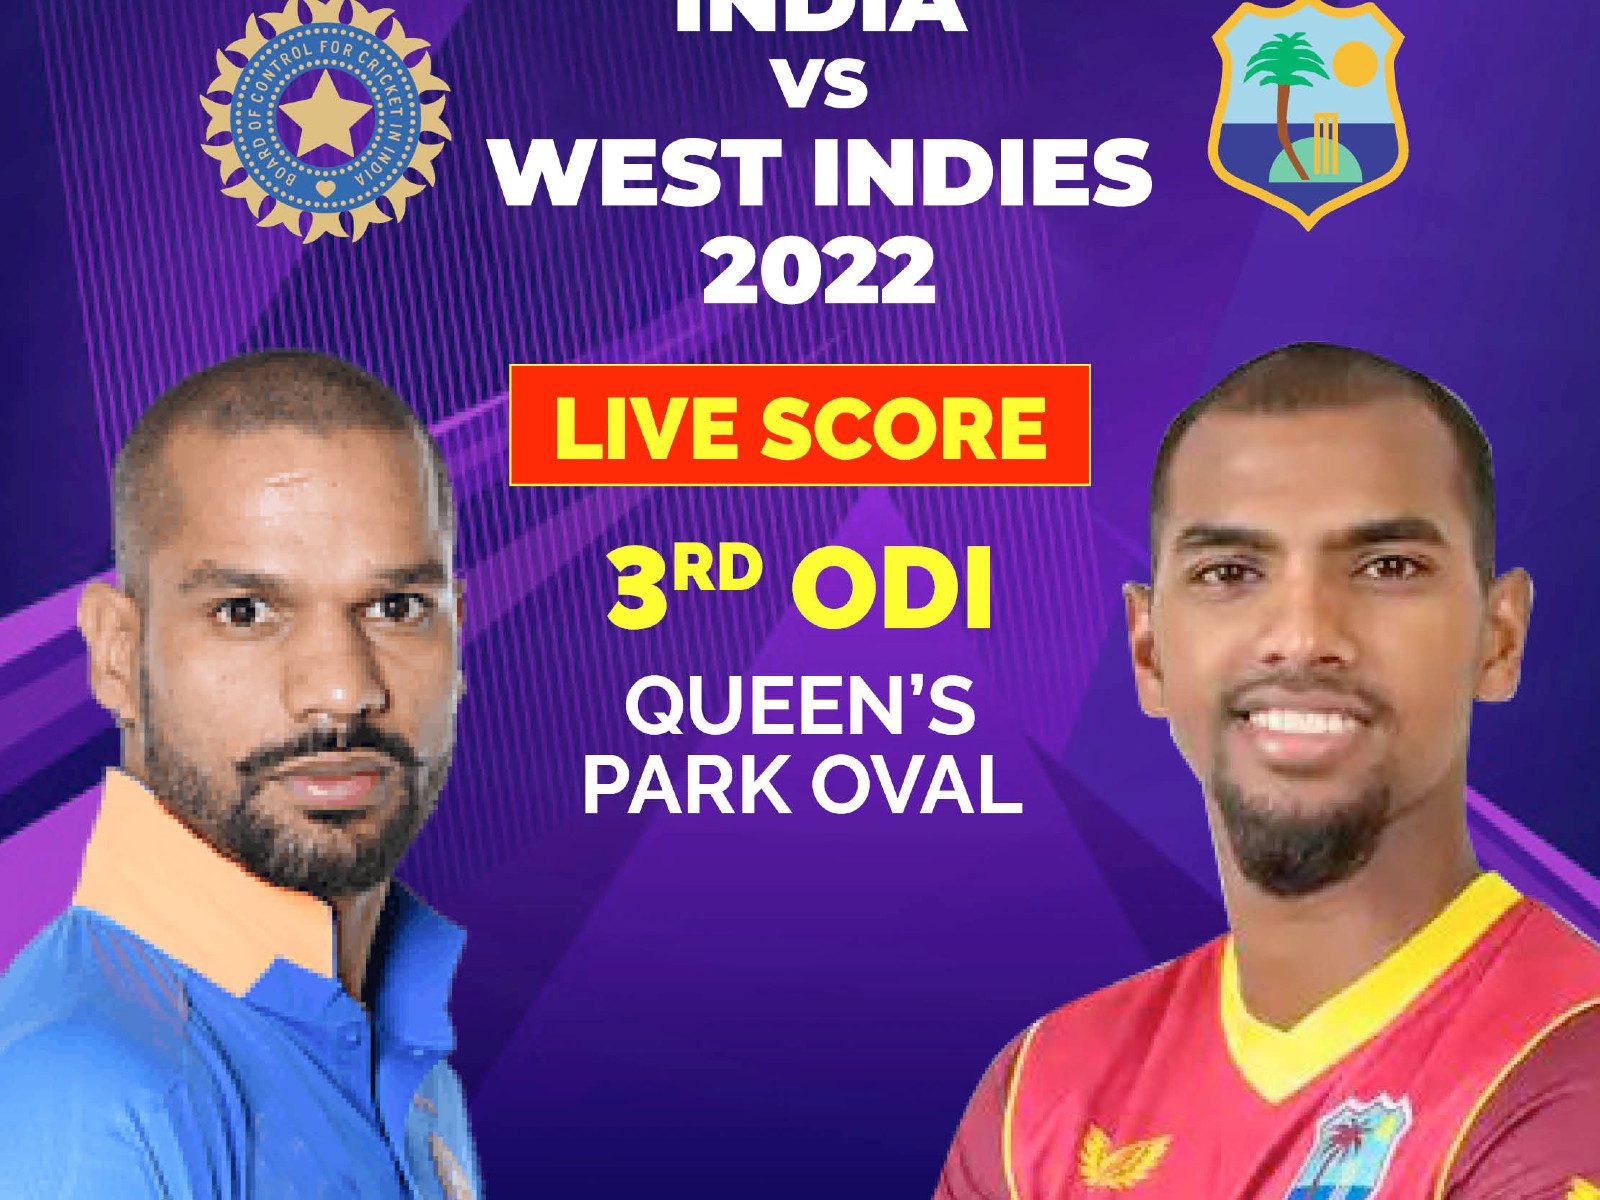 India vs West Indies 3rd ODI Highlights India Beat West Indies by 119 Runs to Clinch Series 3-0